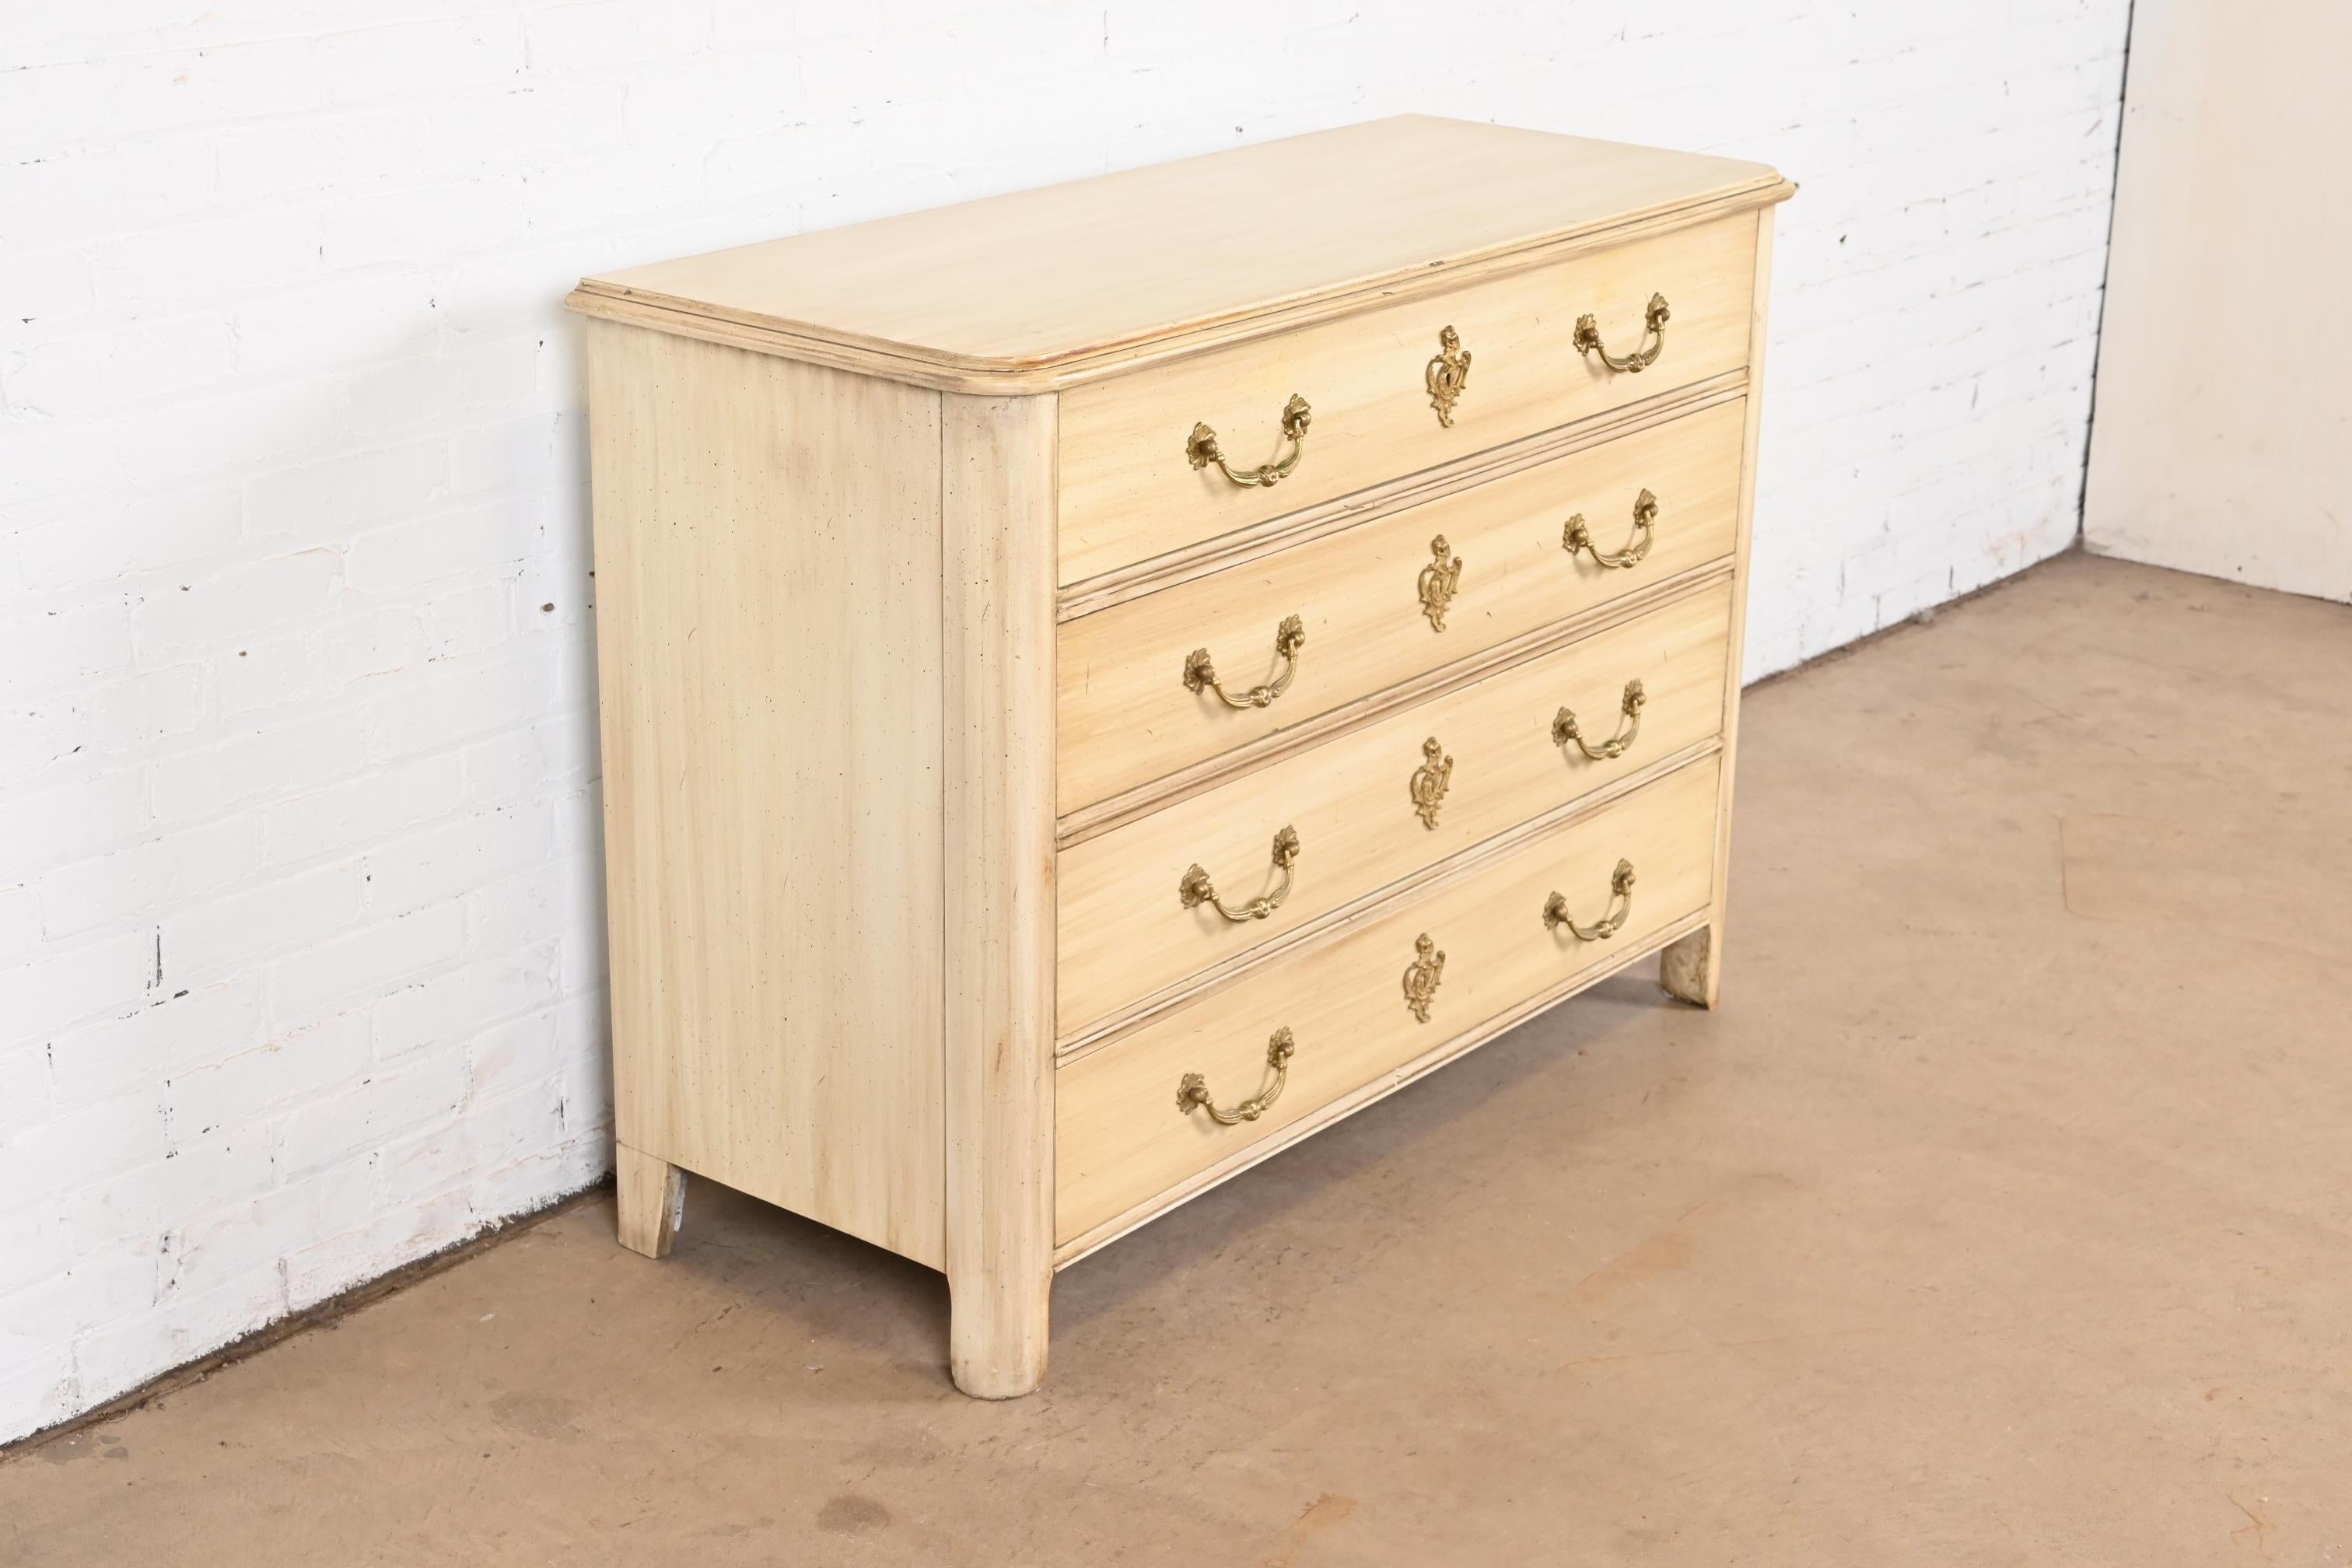 American Baker Furniture French Provincial Cream Painted Chest of Drawers, Circa 1960s For Sale